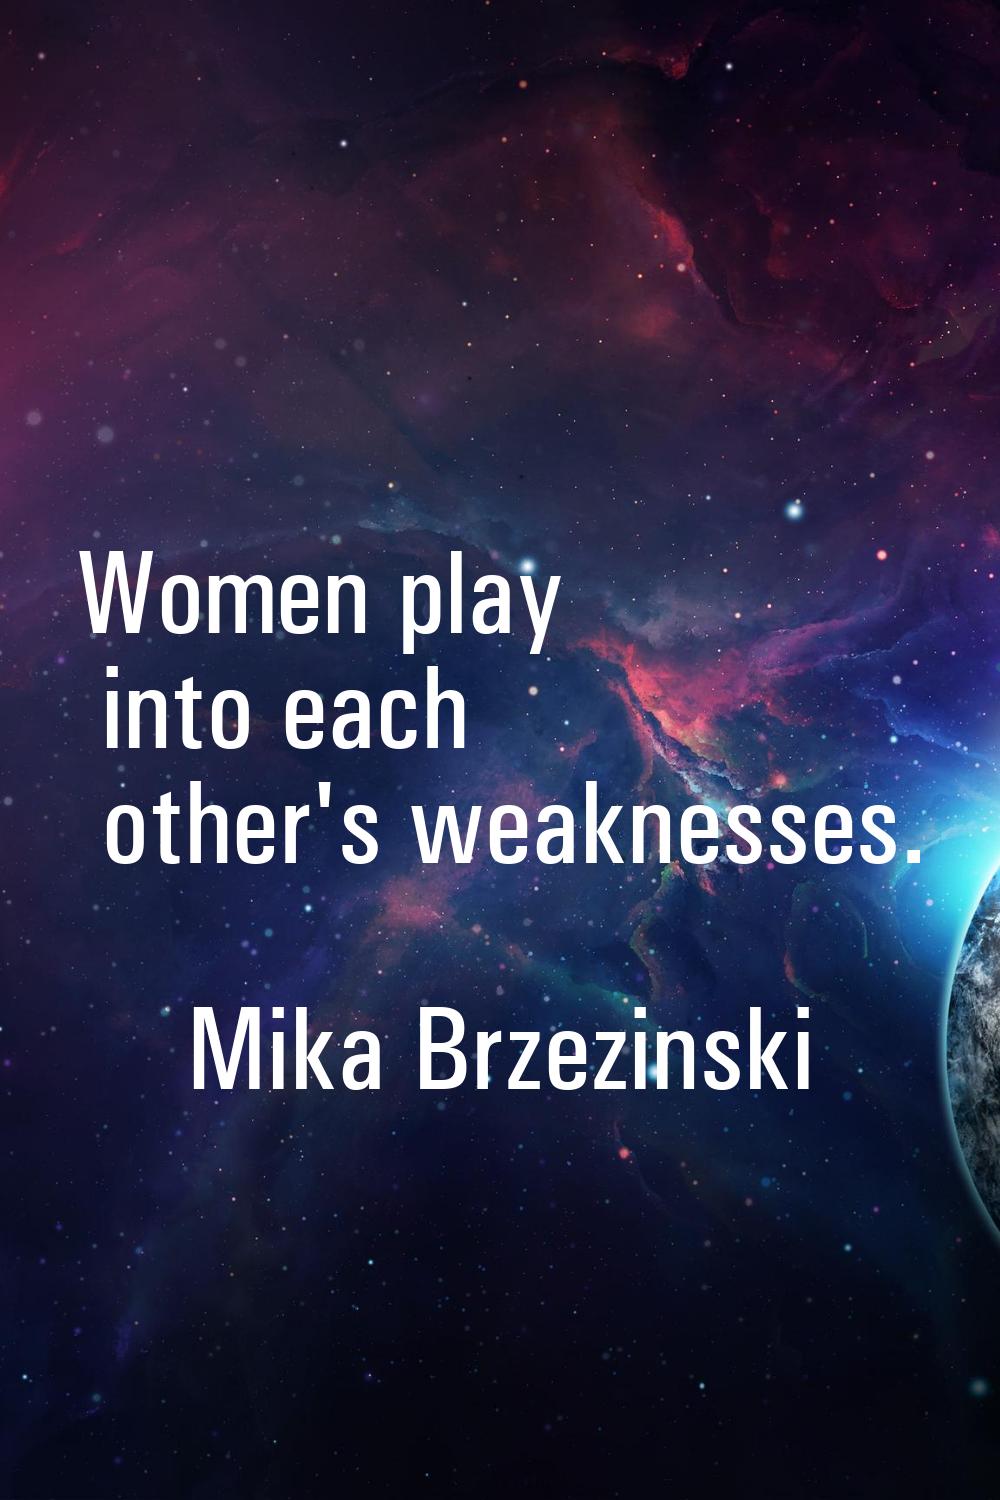 Women play into each other's weaknesses.